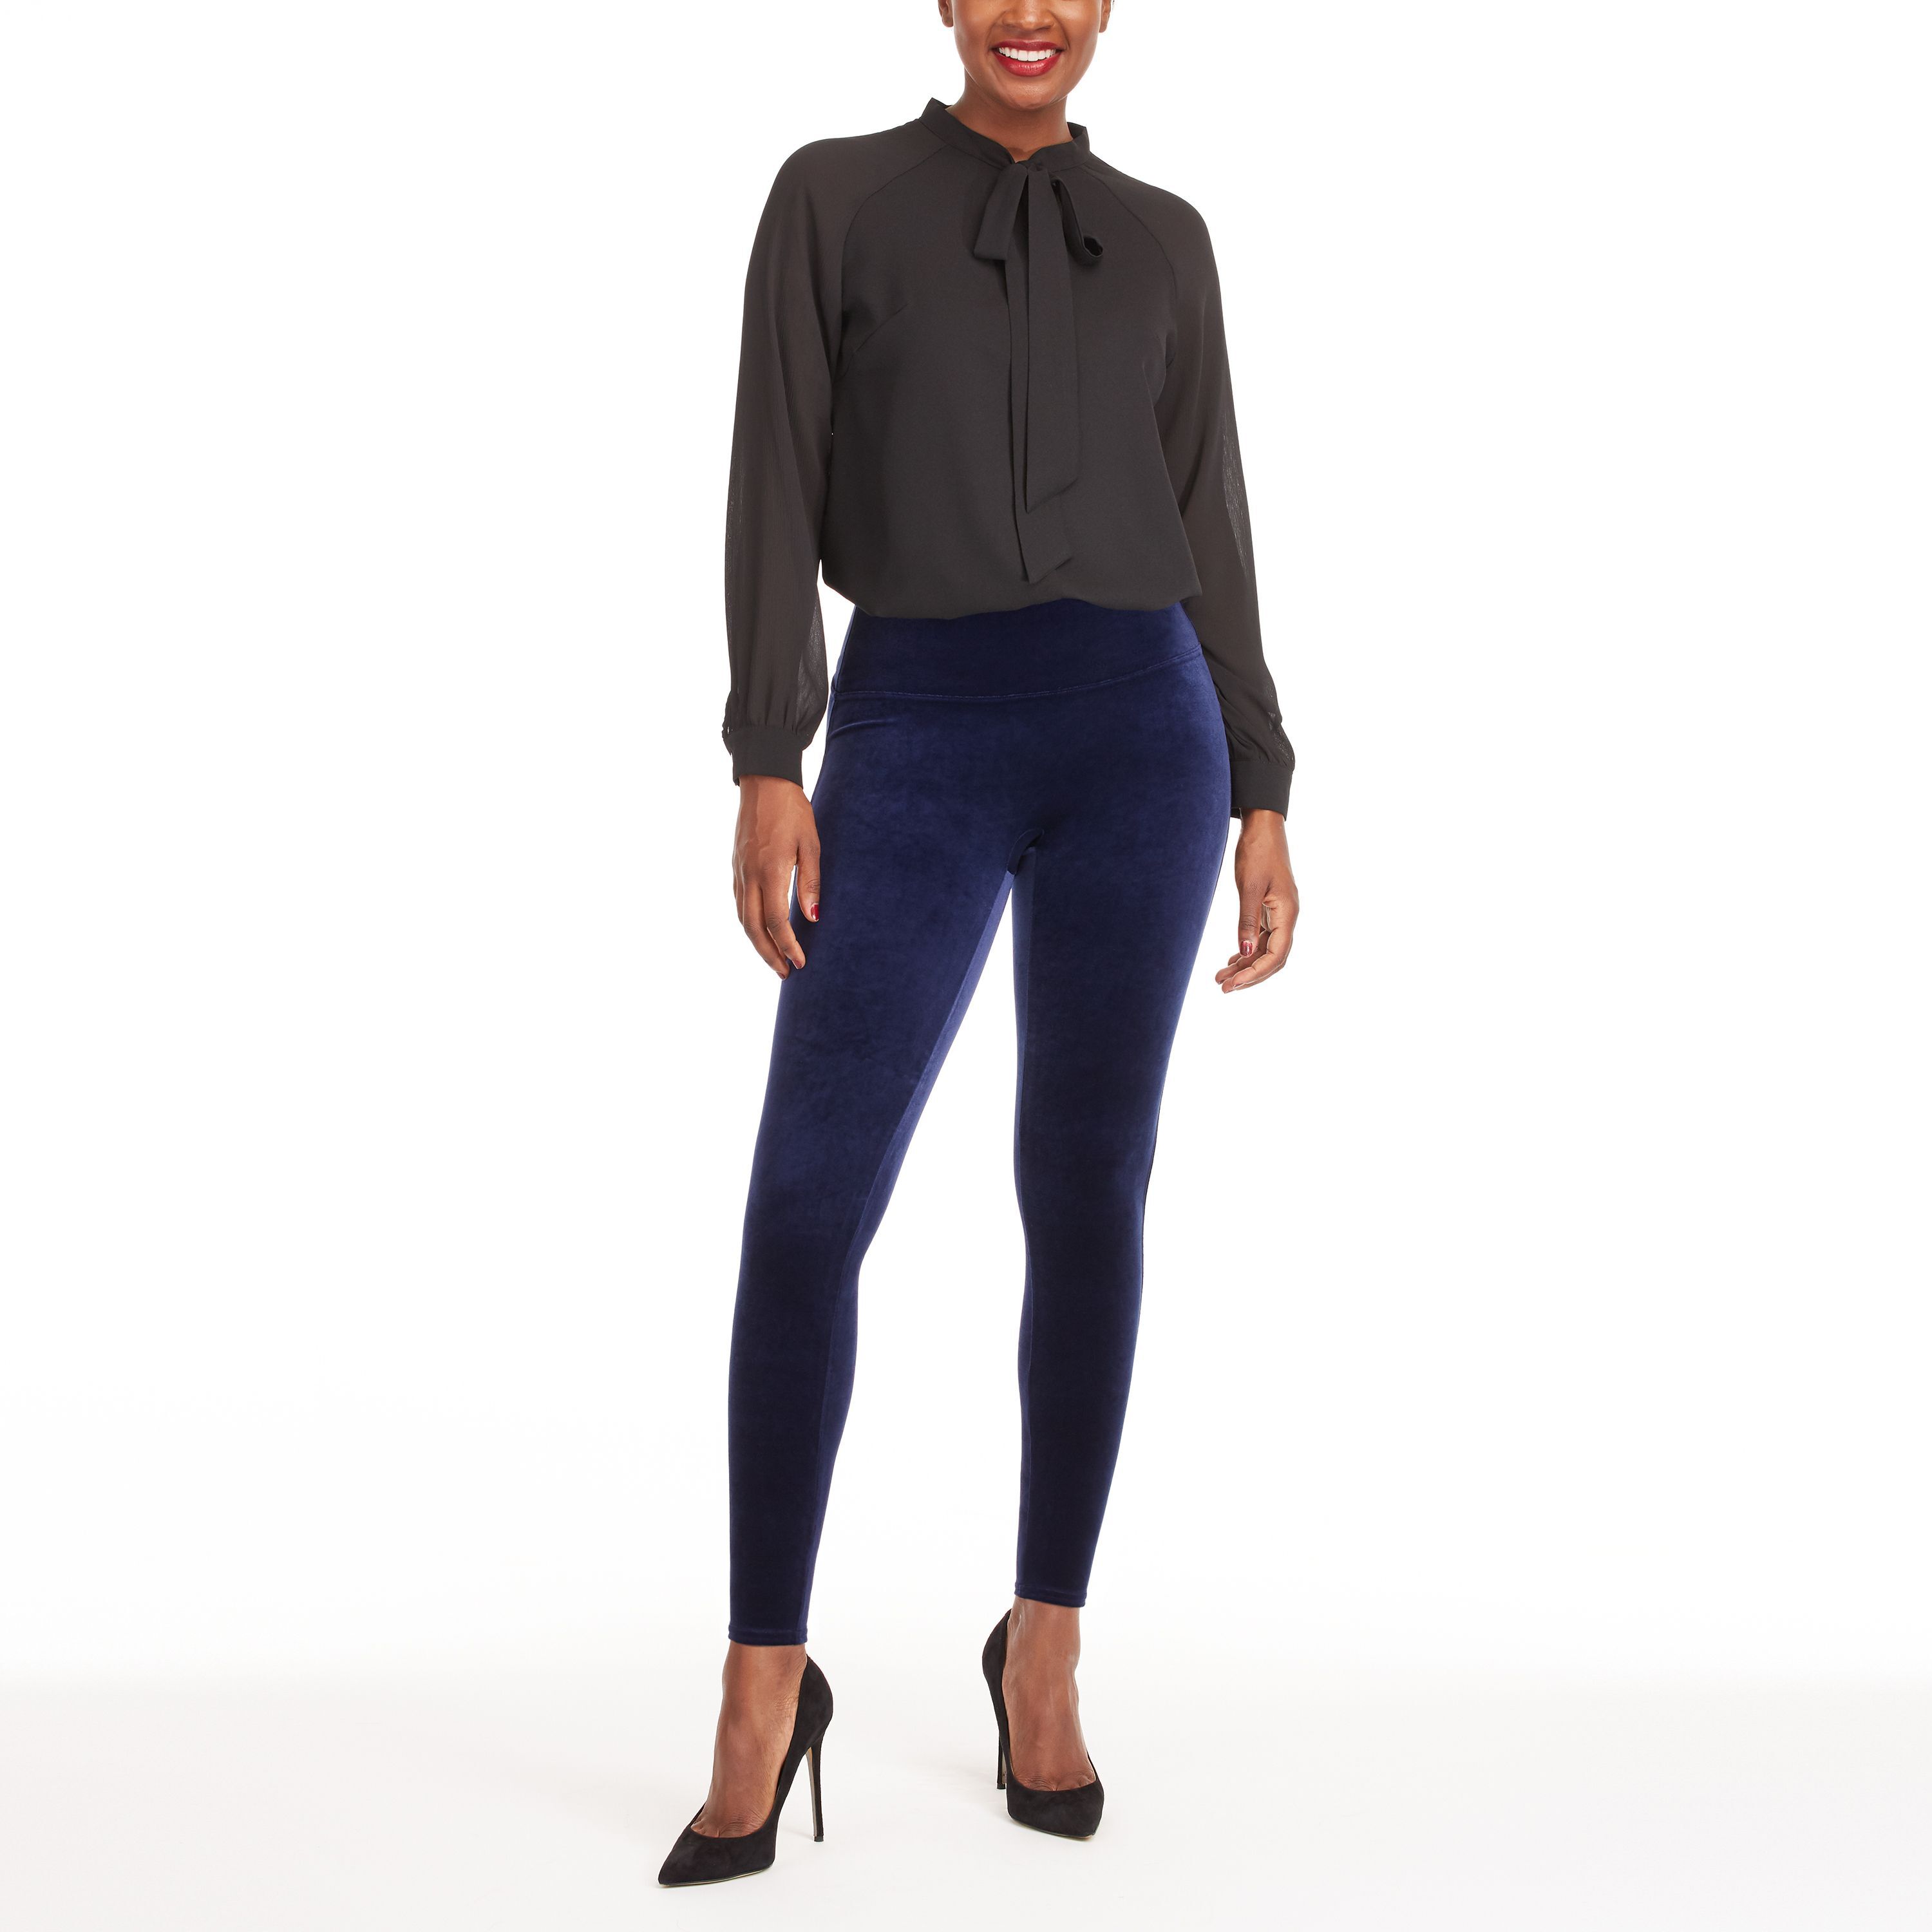 SPANX - LIMITED EDITION VELVET LEGGINGS! You have to feel these super soft  leggings. Even better, with our signature waistband, our Velvet Leggings  give you the best booty. Now in the perfect